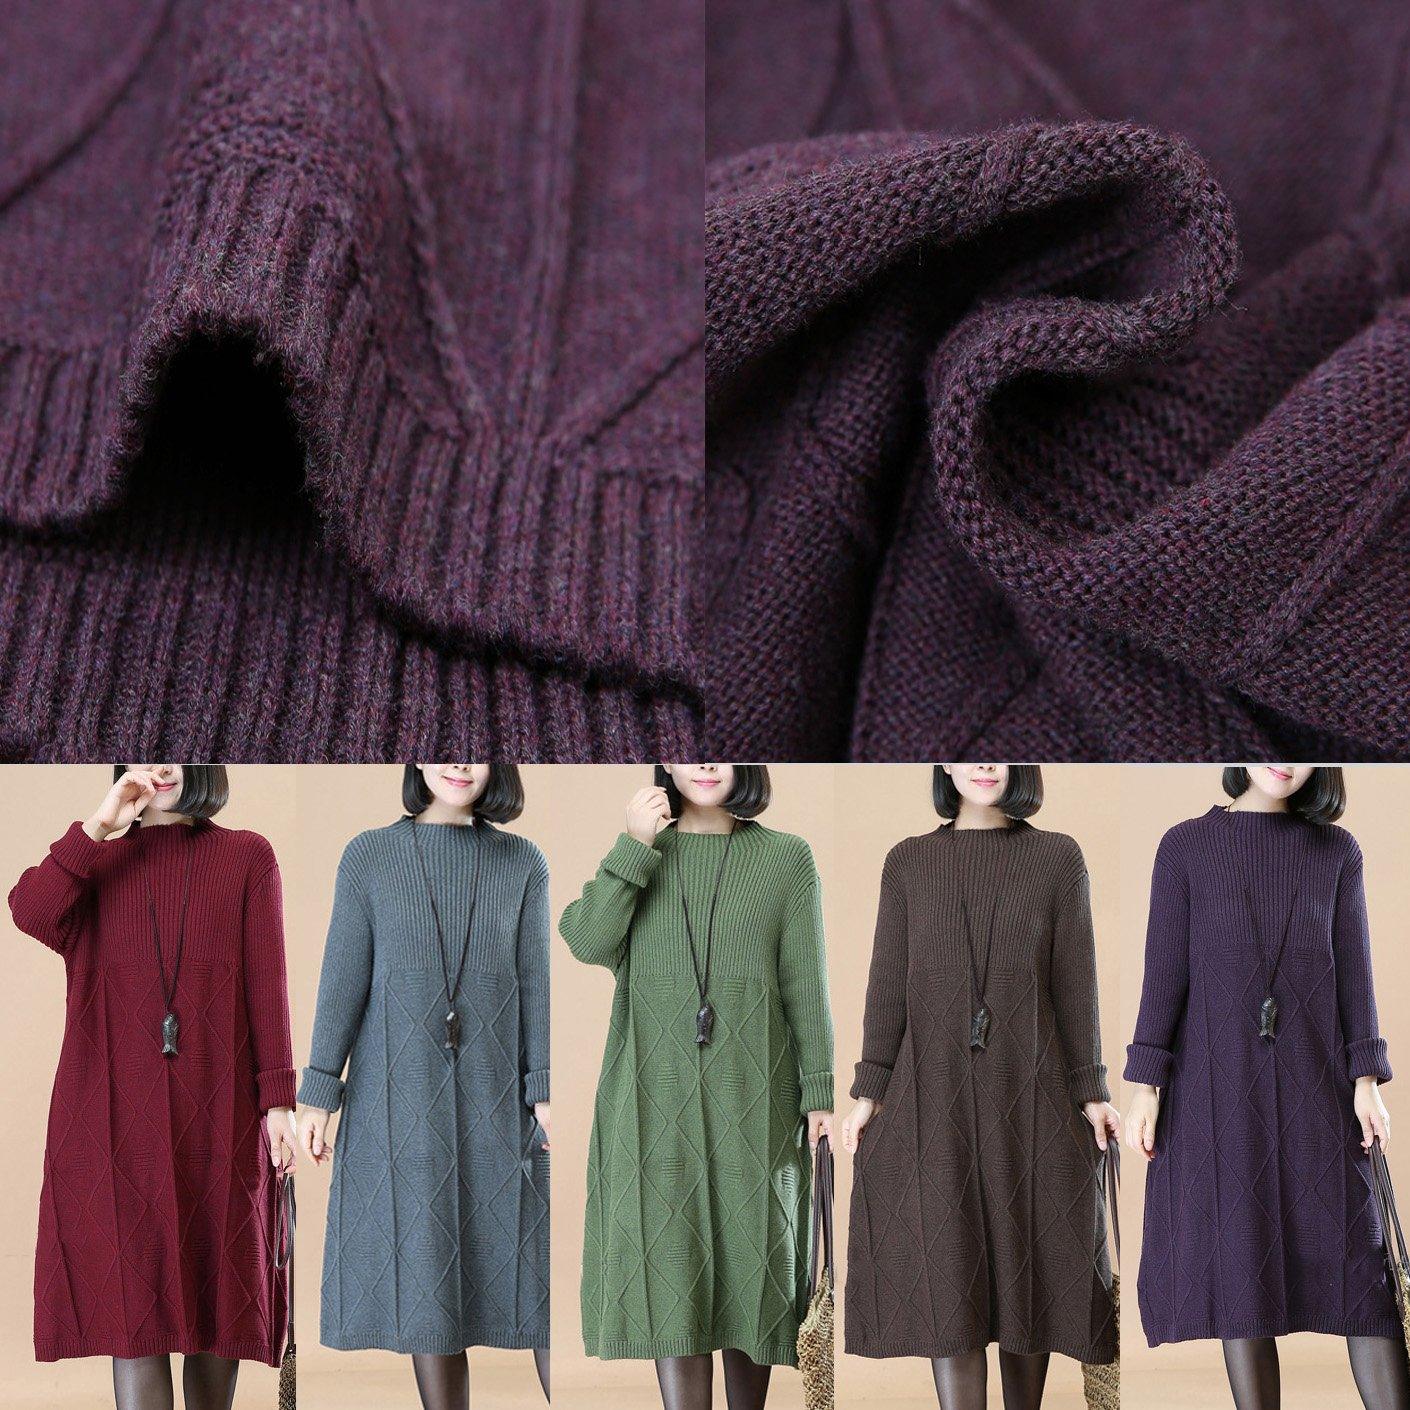 boutique chocolate knit dress Loose fitting pullover casual long knit sweaters - Omychic